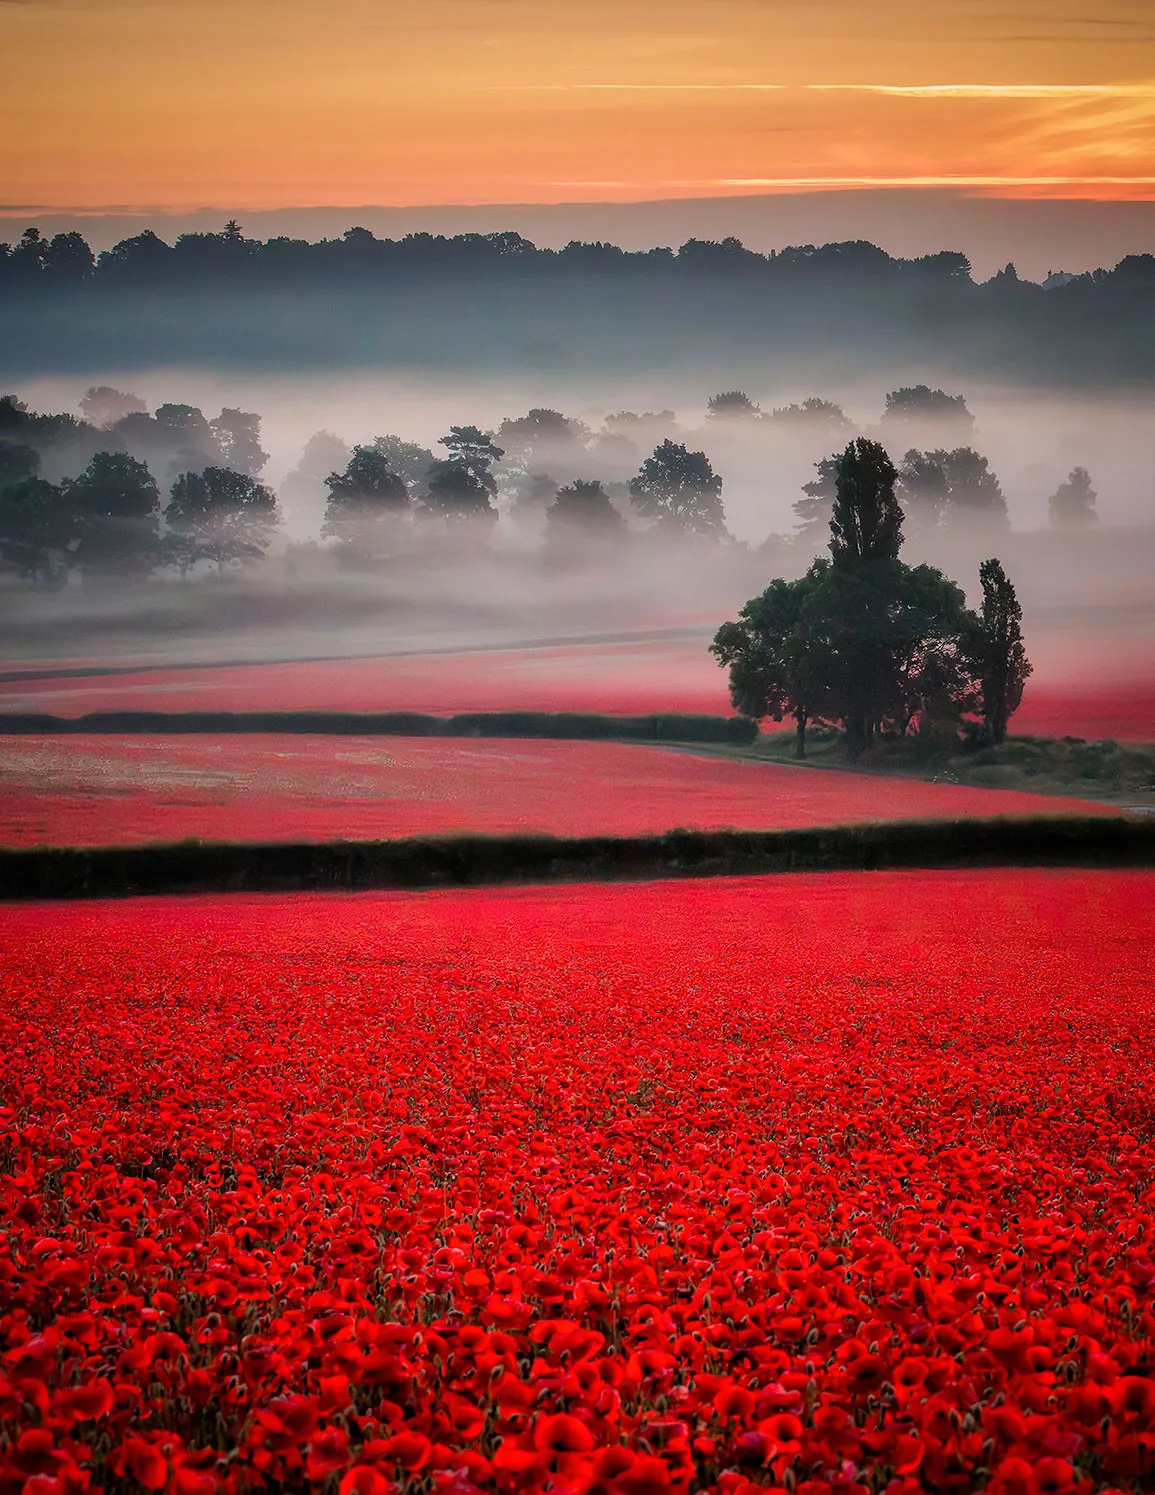 A brilliantly red sea of poppies